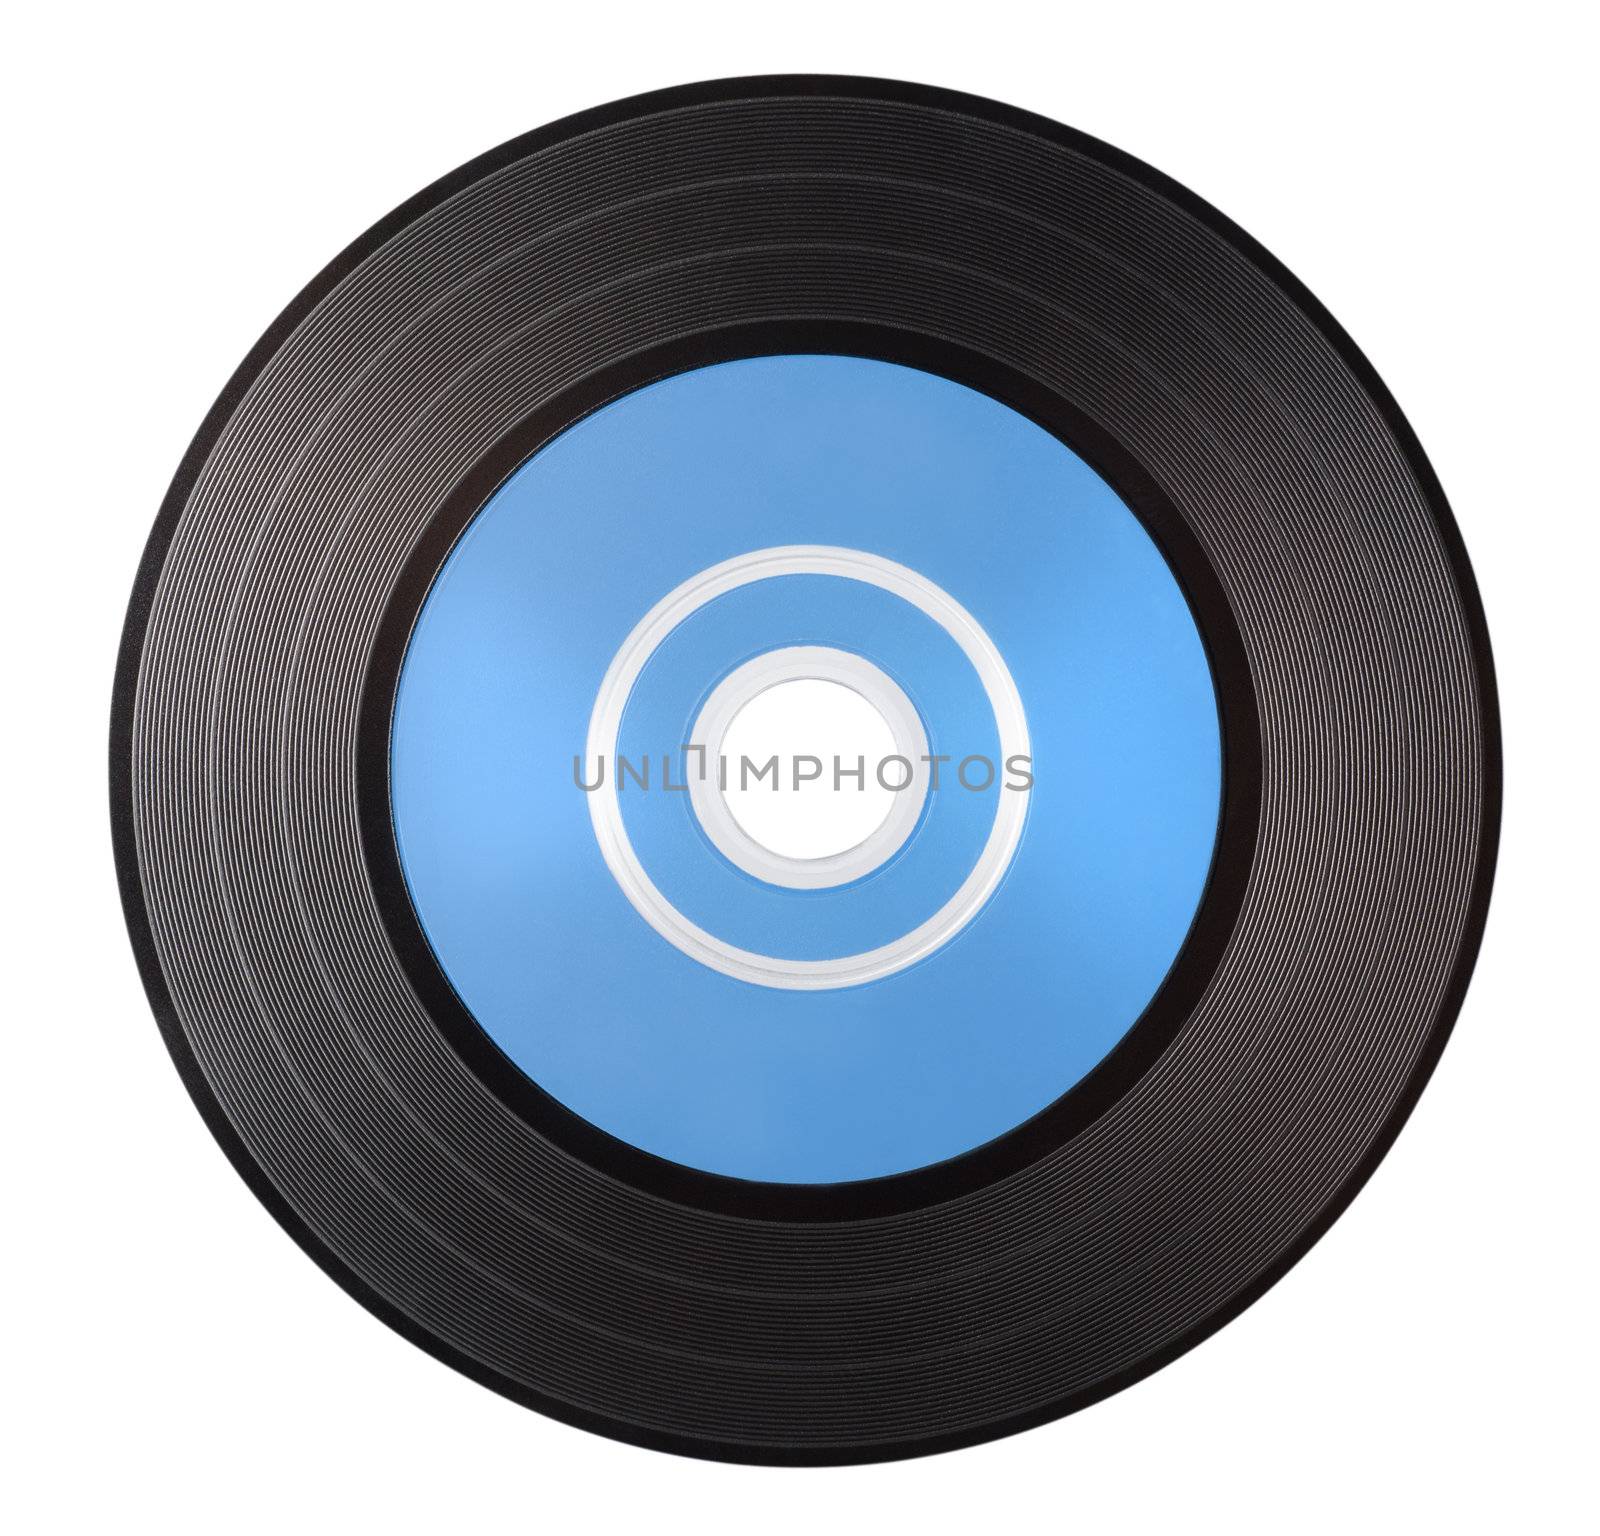 Vinyl record by Givaga